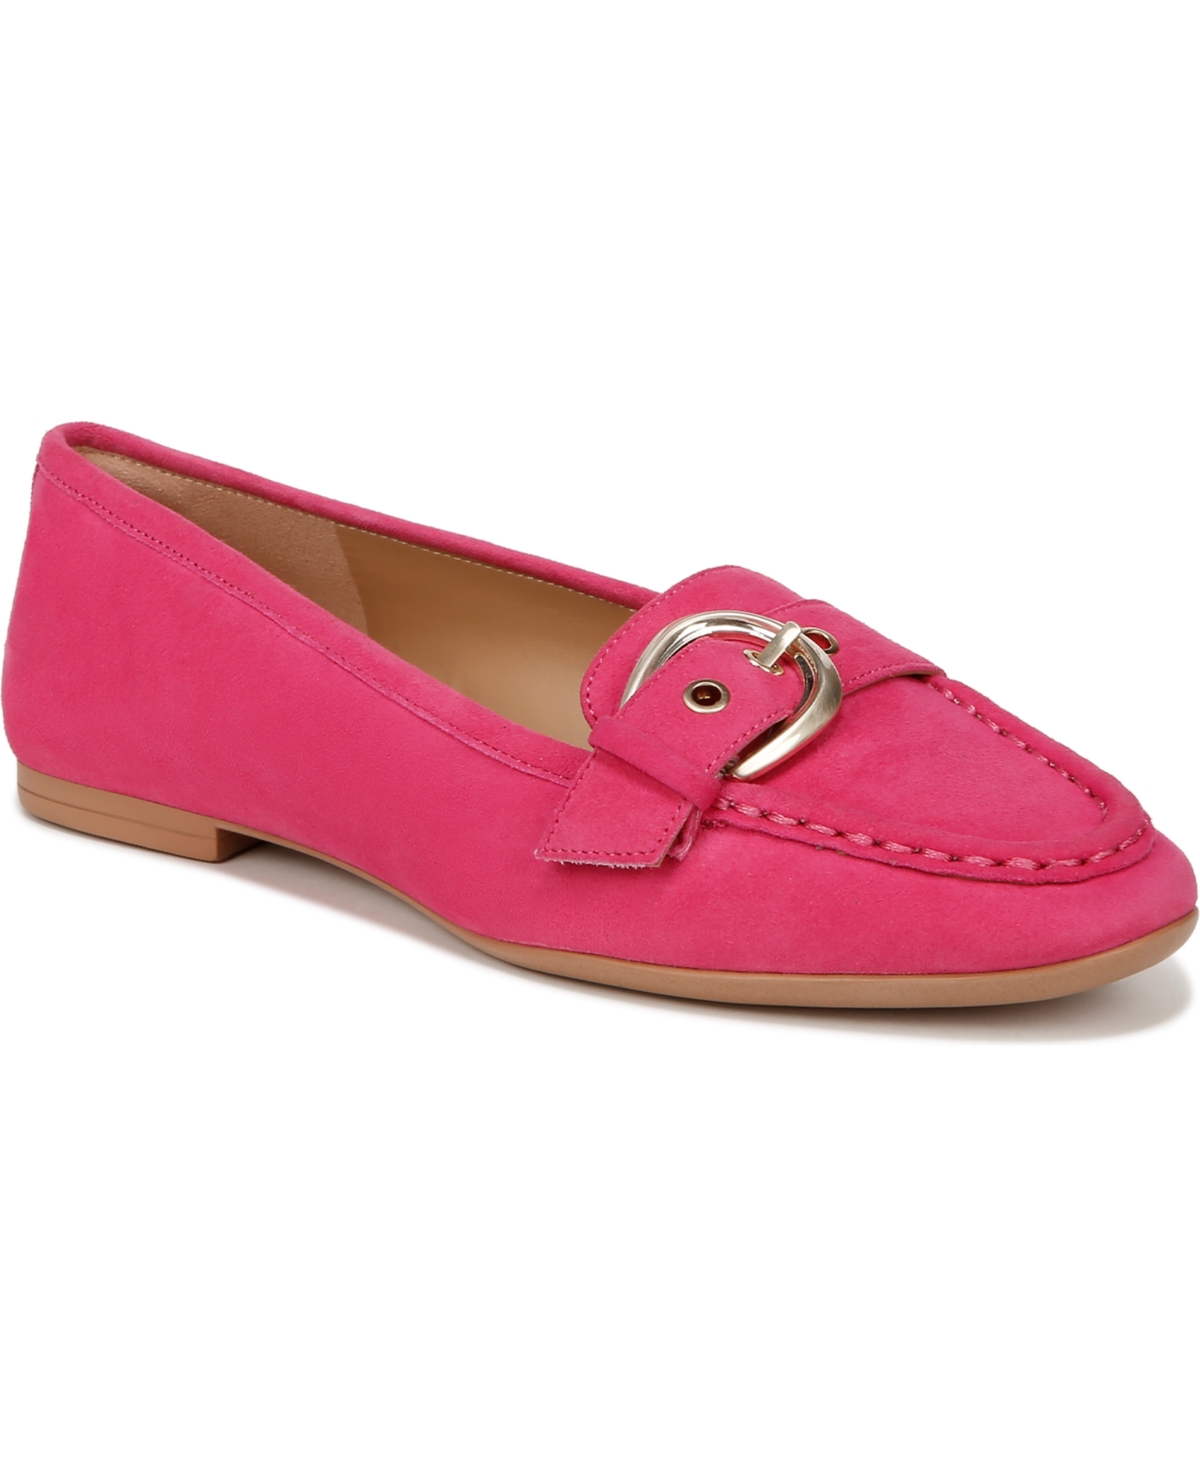 Naturalizer Lola 2 Slip-on Buckle Flats In Pink Flash Suede